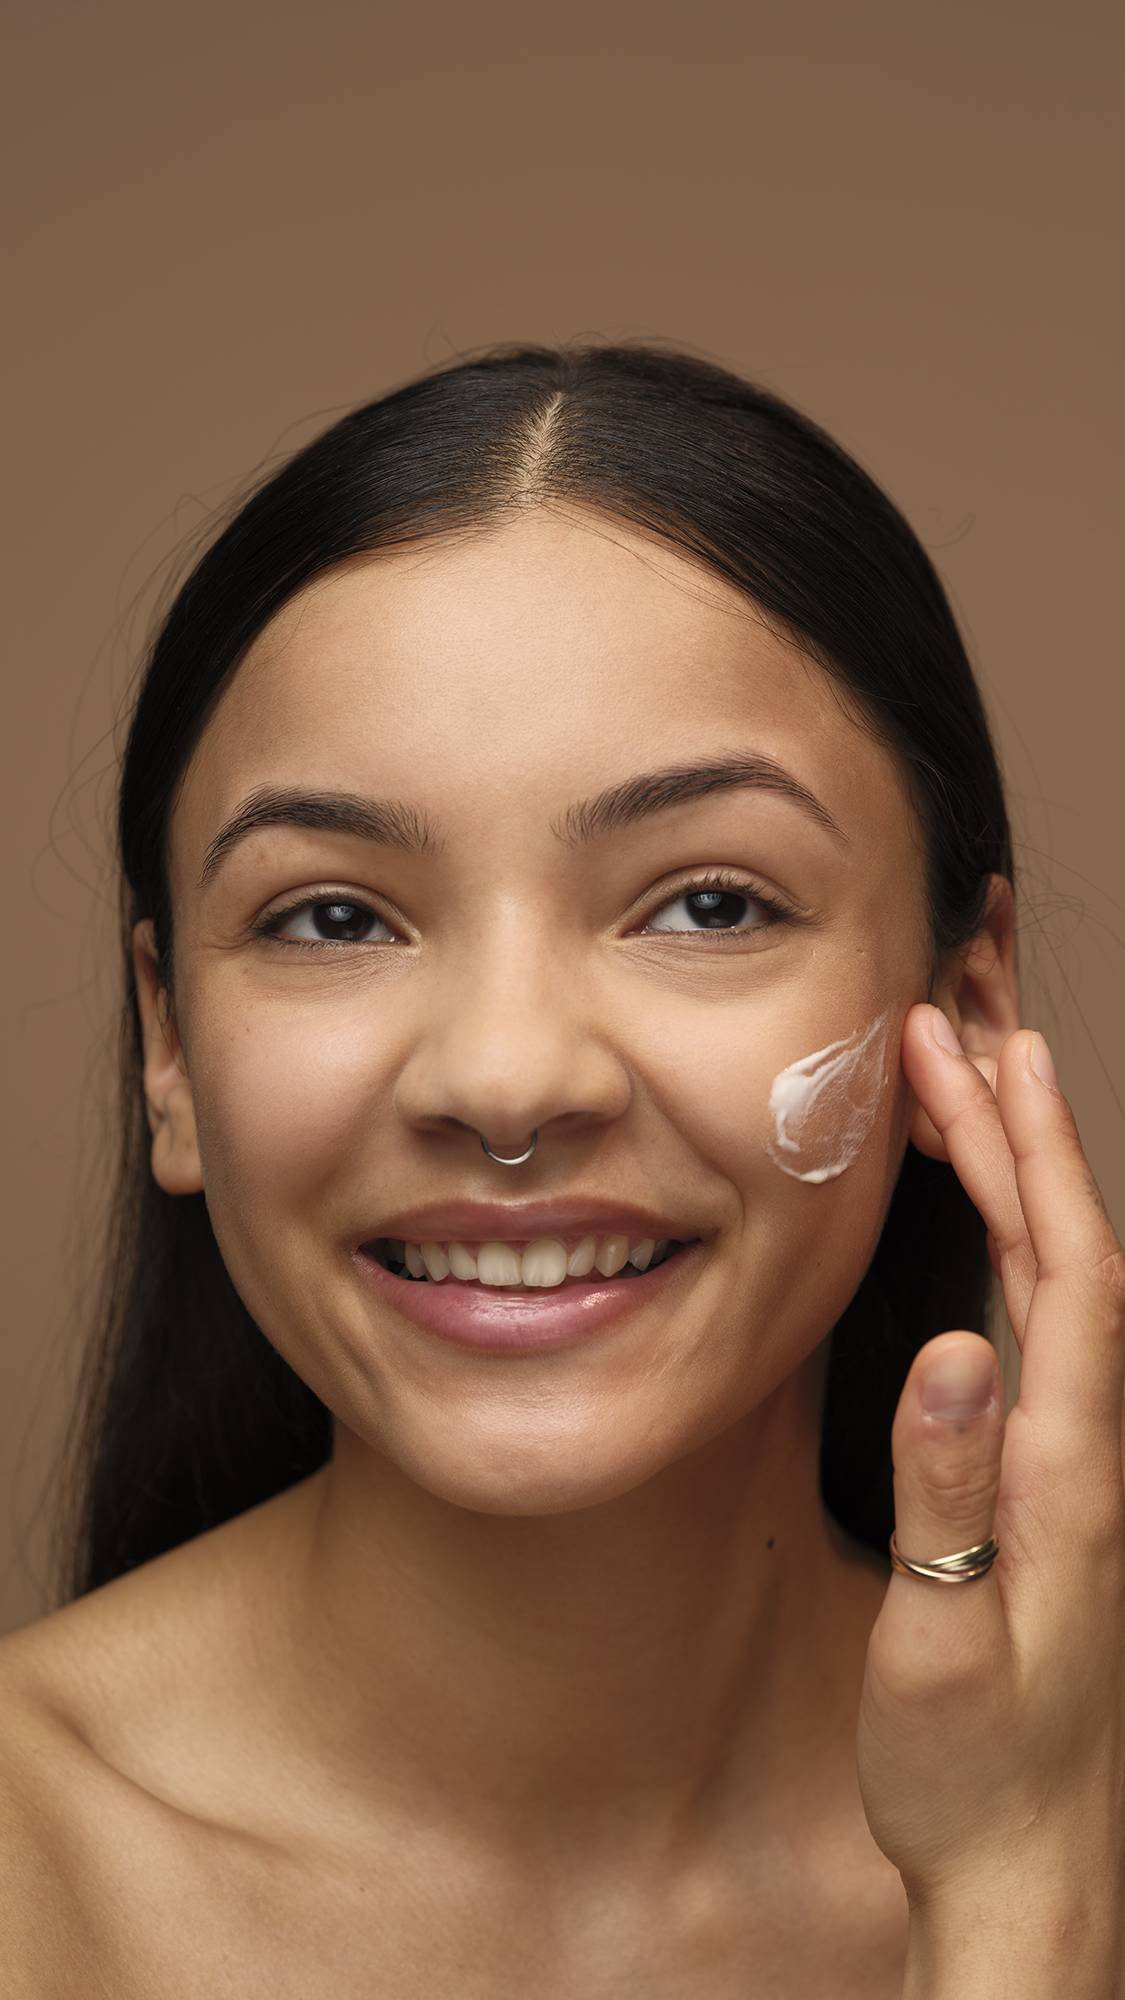 An image of the model's smiling face as they start to apply the Enzymion self-preserving moisturiser to one cheek. They are on a warm, earthy-brown background. 